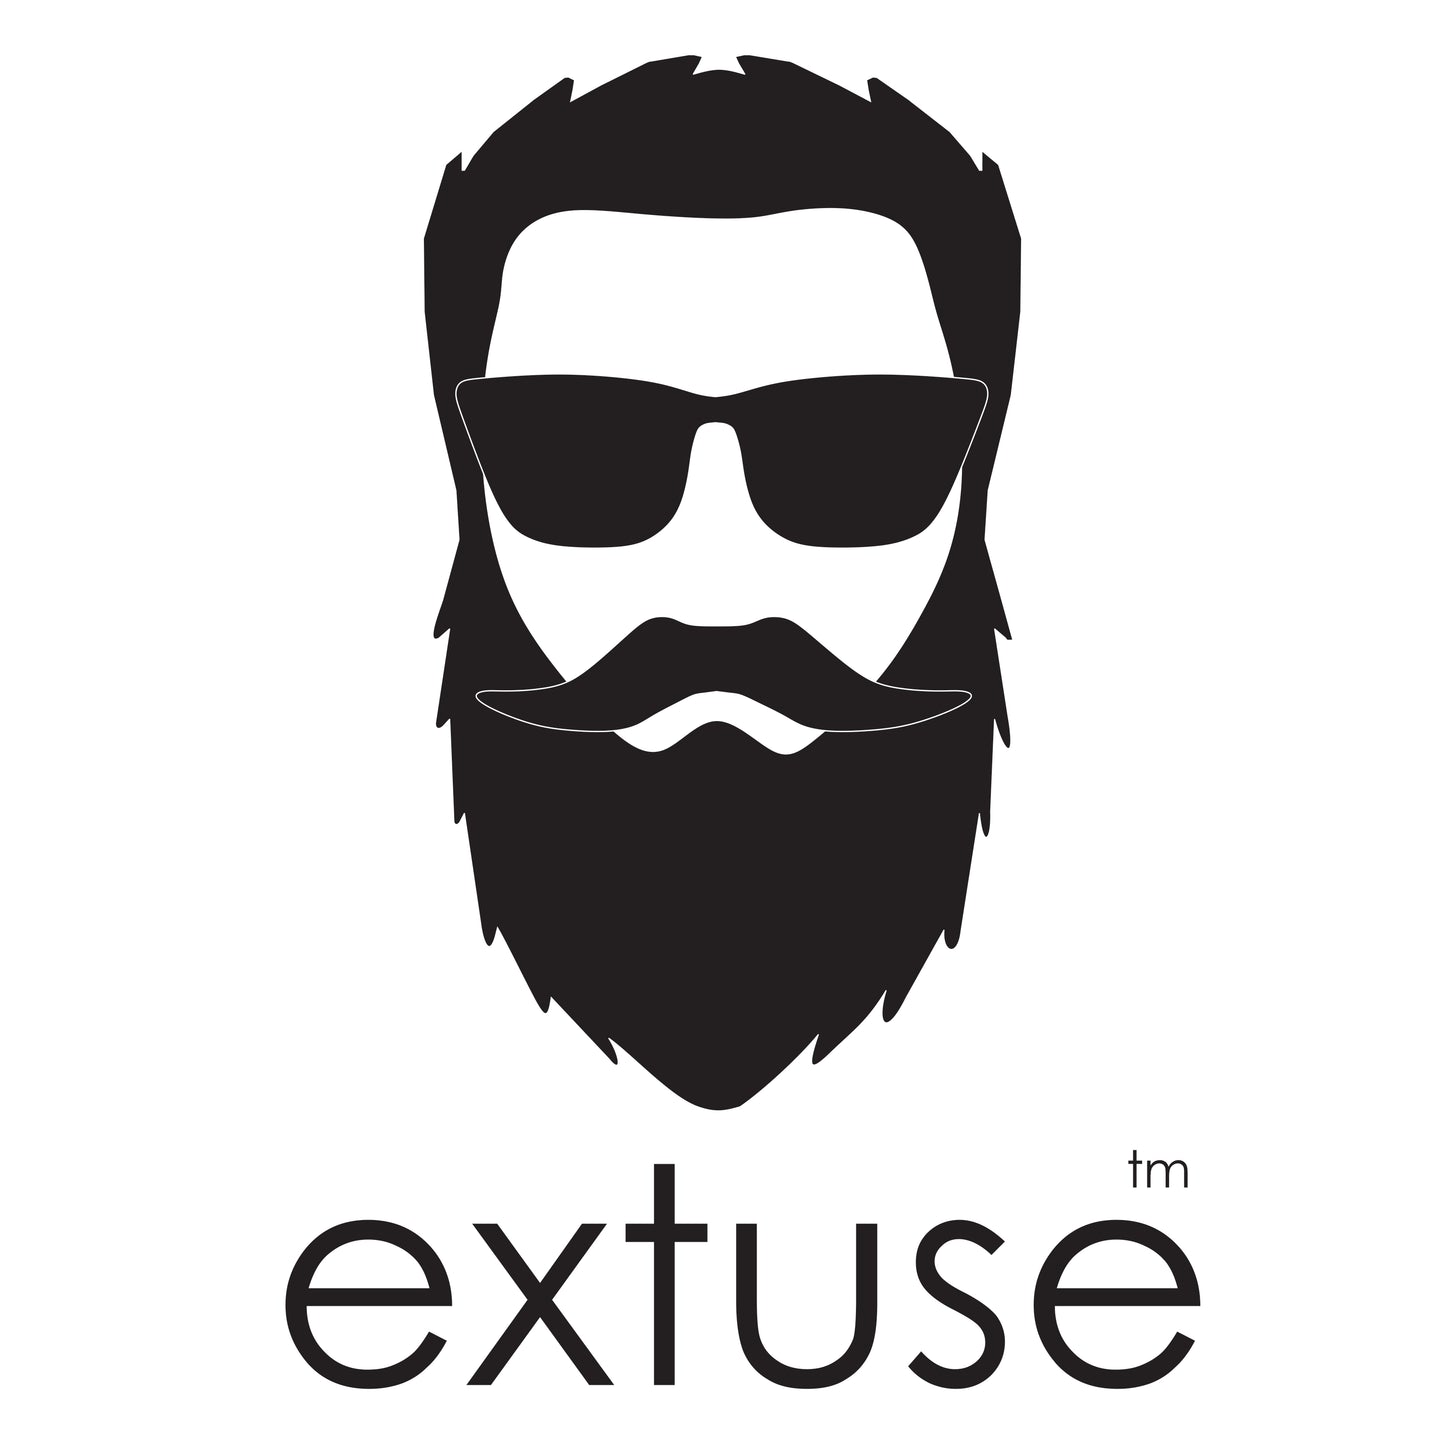 Extuse | 1/2in, Black, Elastic Rubber Band Pony Tail Holders | Made in USA, Ideal for Ponytails, Braids, Beards, Twists, Dreadlocks, Styling Accessories for All | 500 Pack